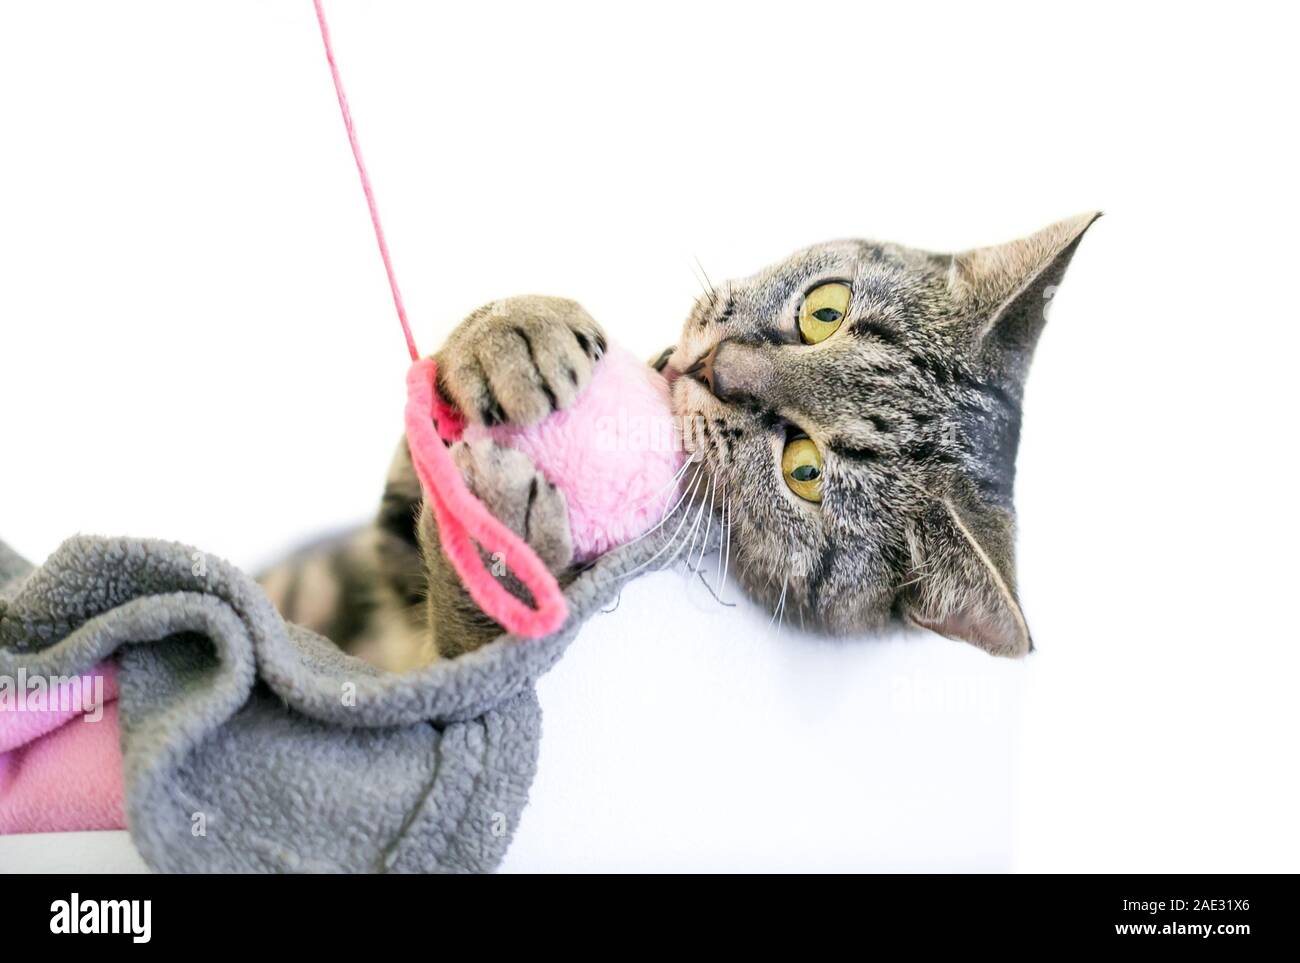 A playful brown tabby domestic shorthair kitten holding a toy in its paws Stock Photo